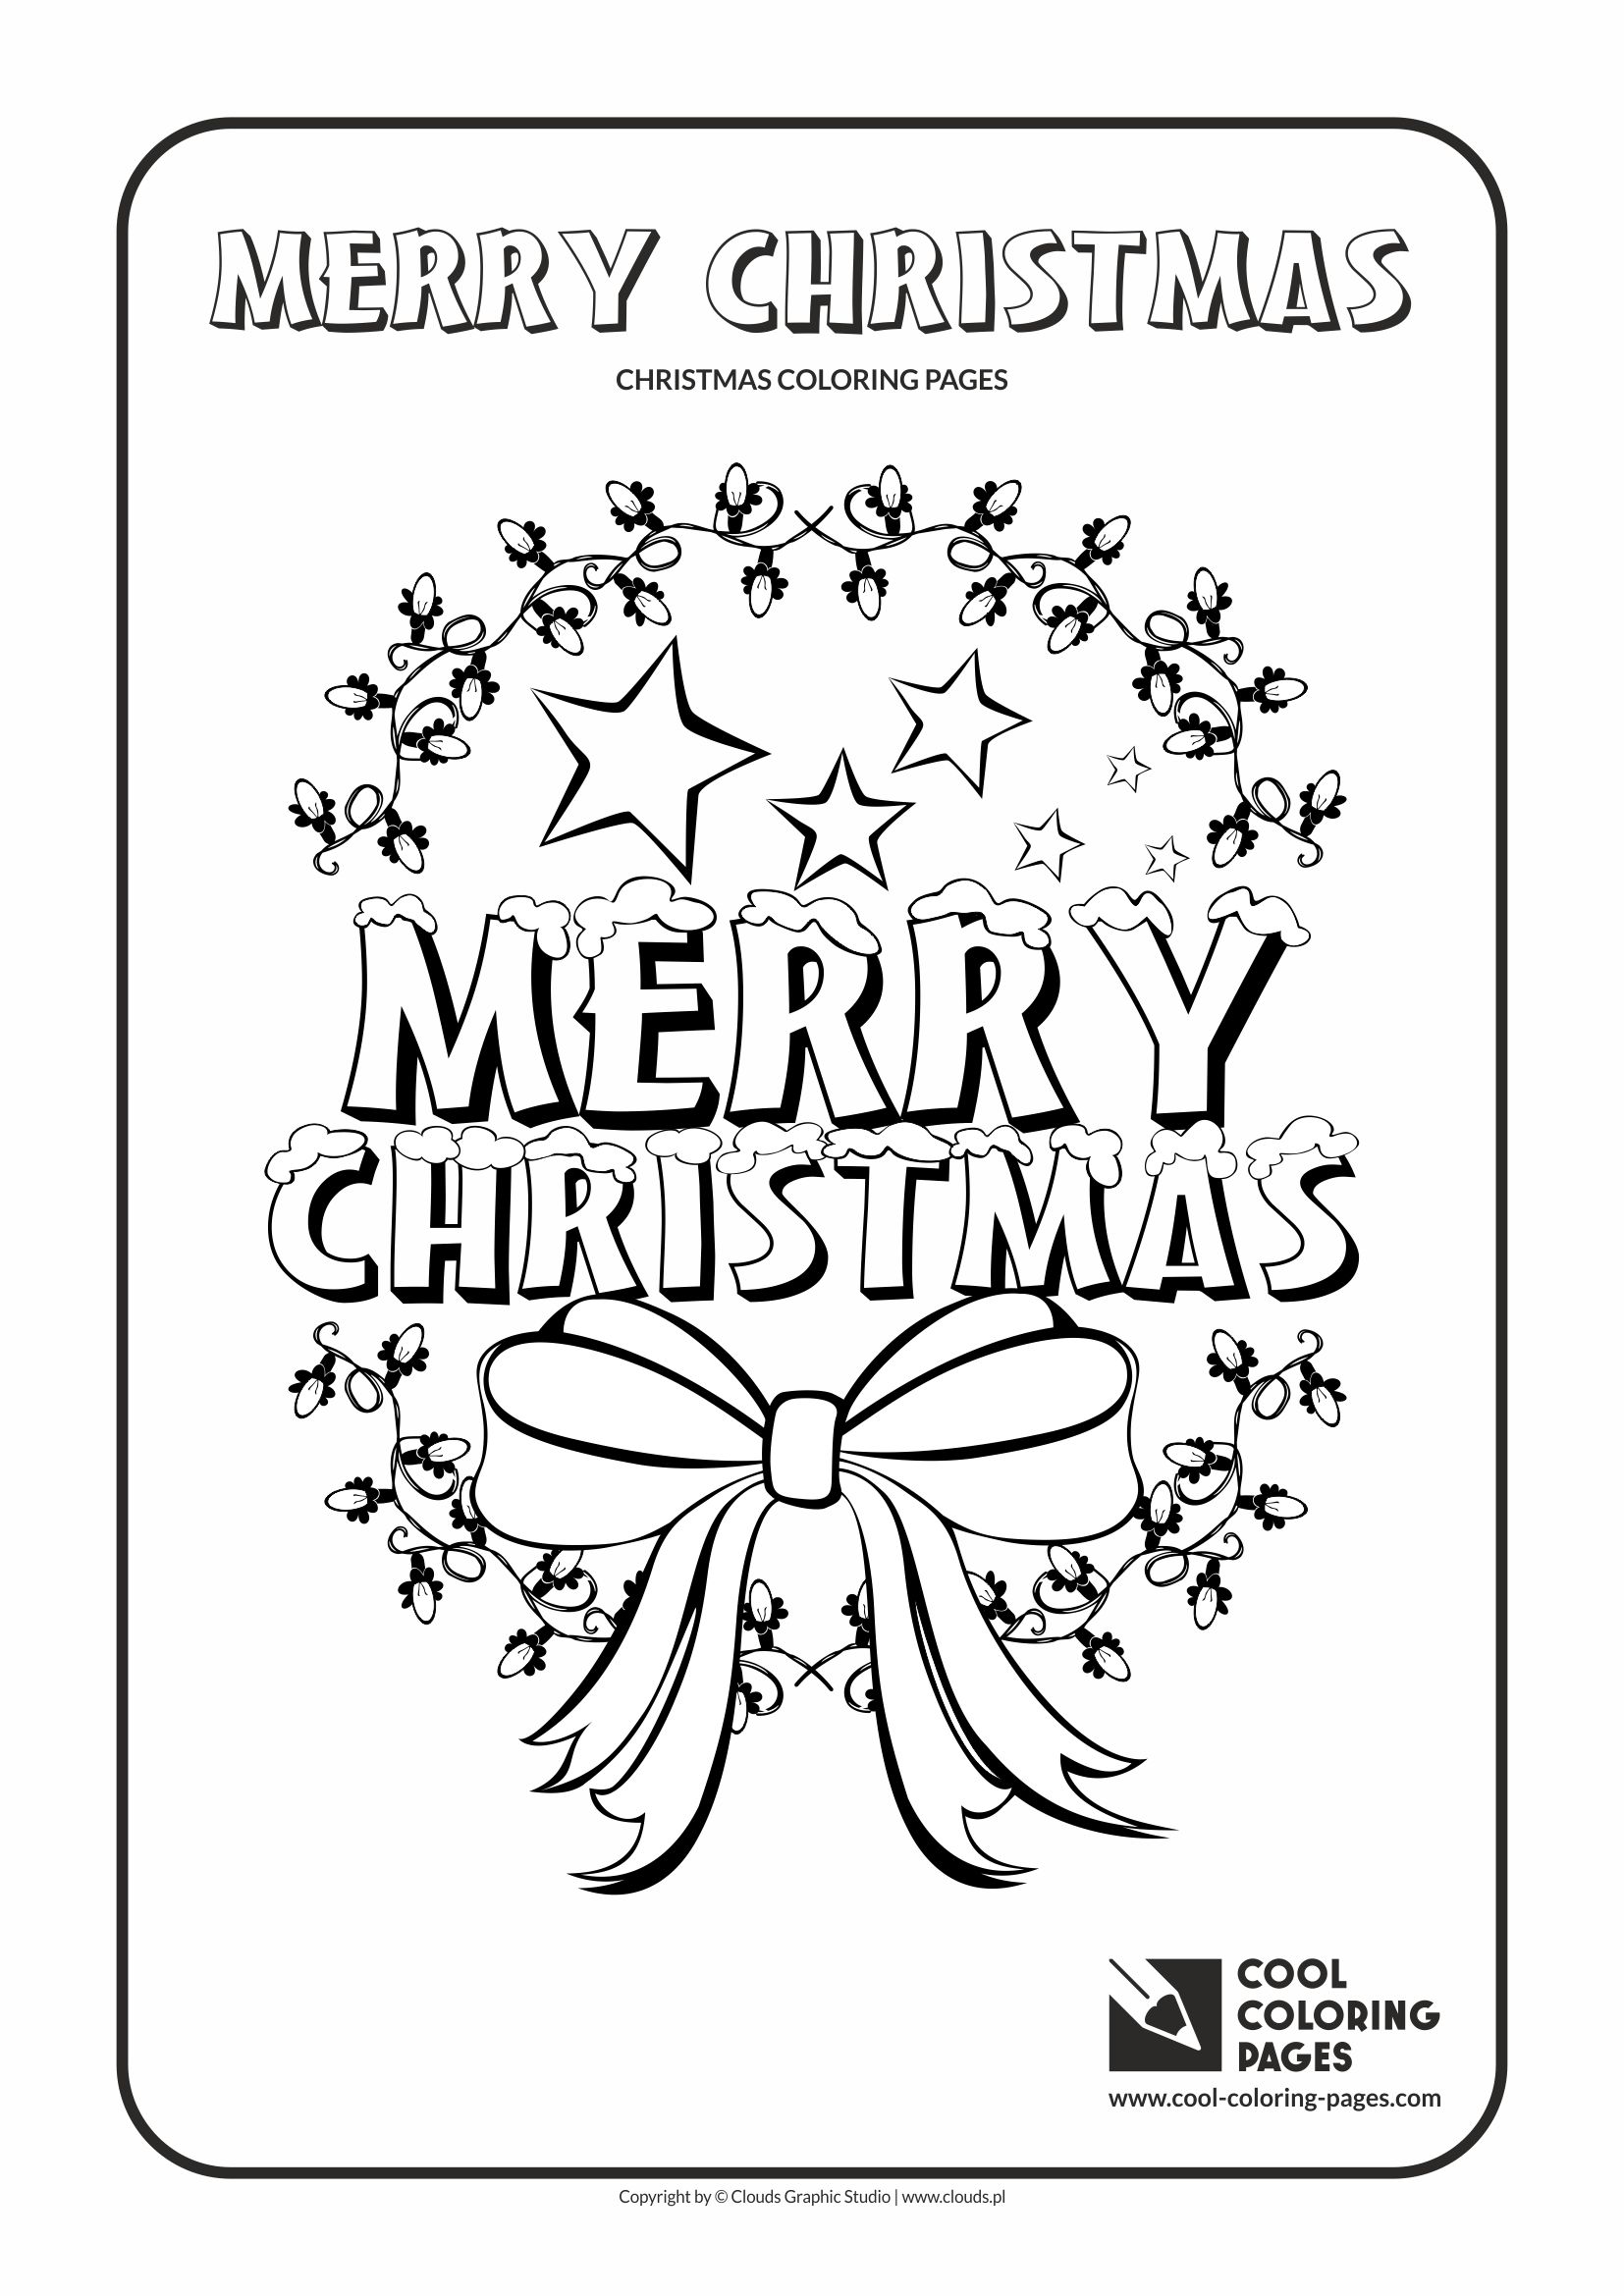 Cool Coloring Pages - Holidays / Merry Christmas no 2 / Coloring page with Merry Christmas no 2